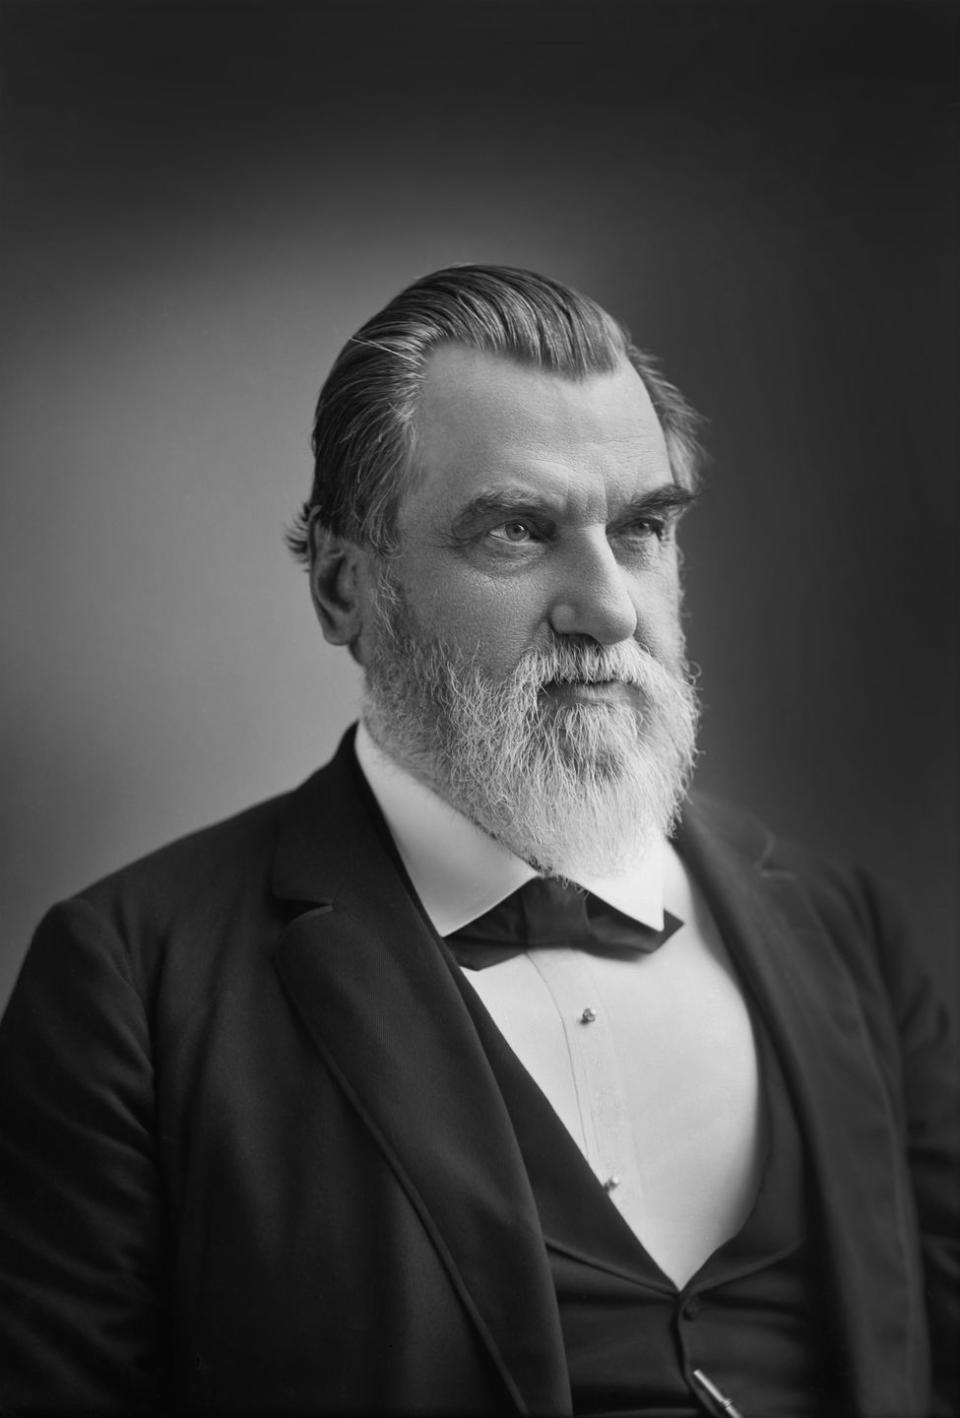 leland stanford 1824 1893, american industrialist, politician and founder of stanford university, generally considered to be a robber baron during the gilded age, head and shoulders portrait, washington, dc, usa, photo by cm bell, 1890